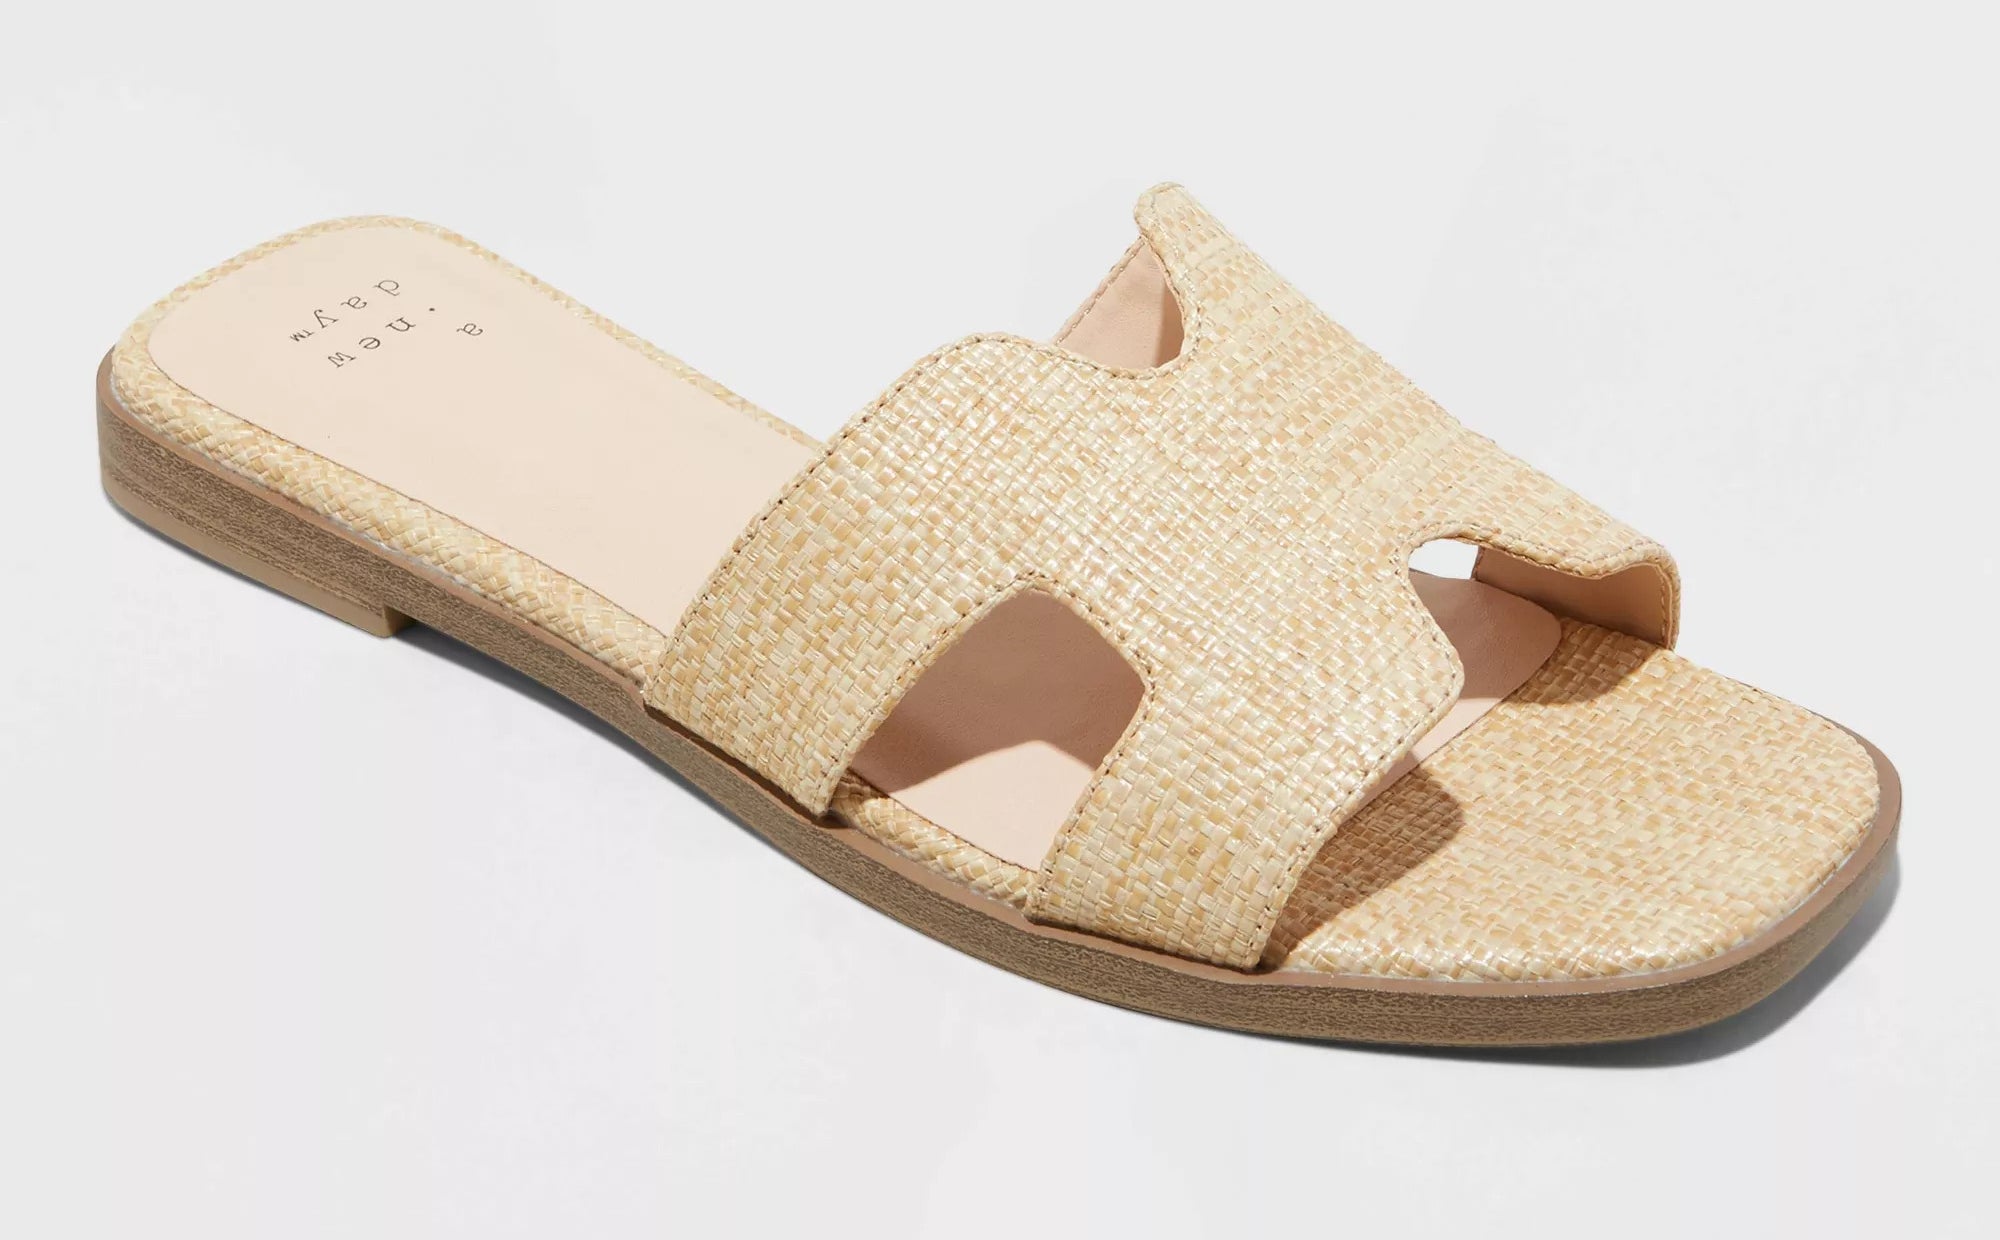 Flat slip-on sandal with textured raffia-like material, open toe, and single strap across the foot